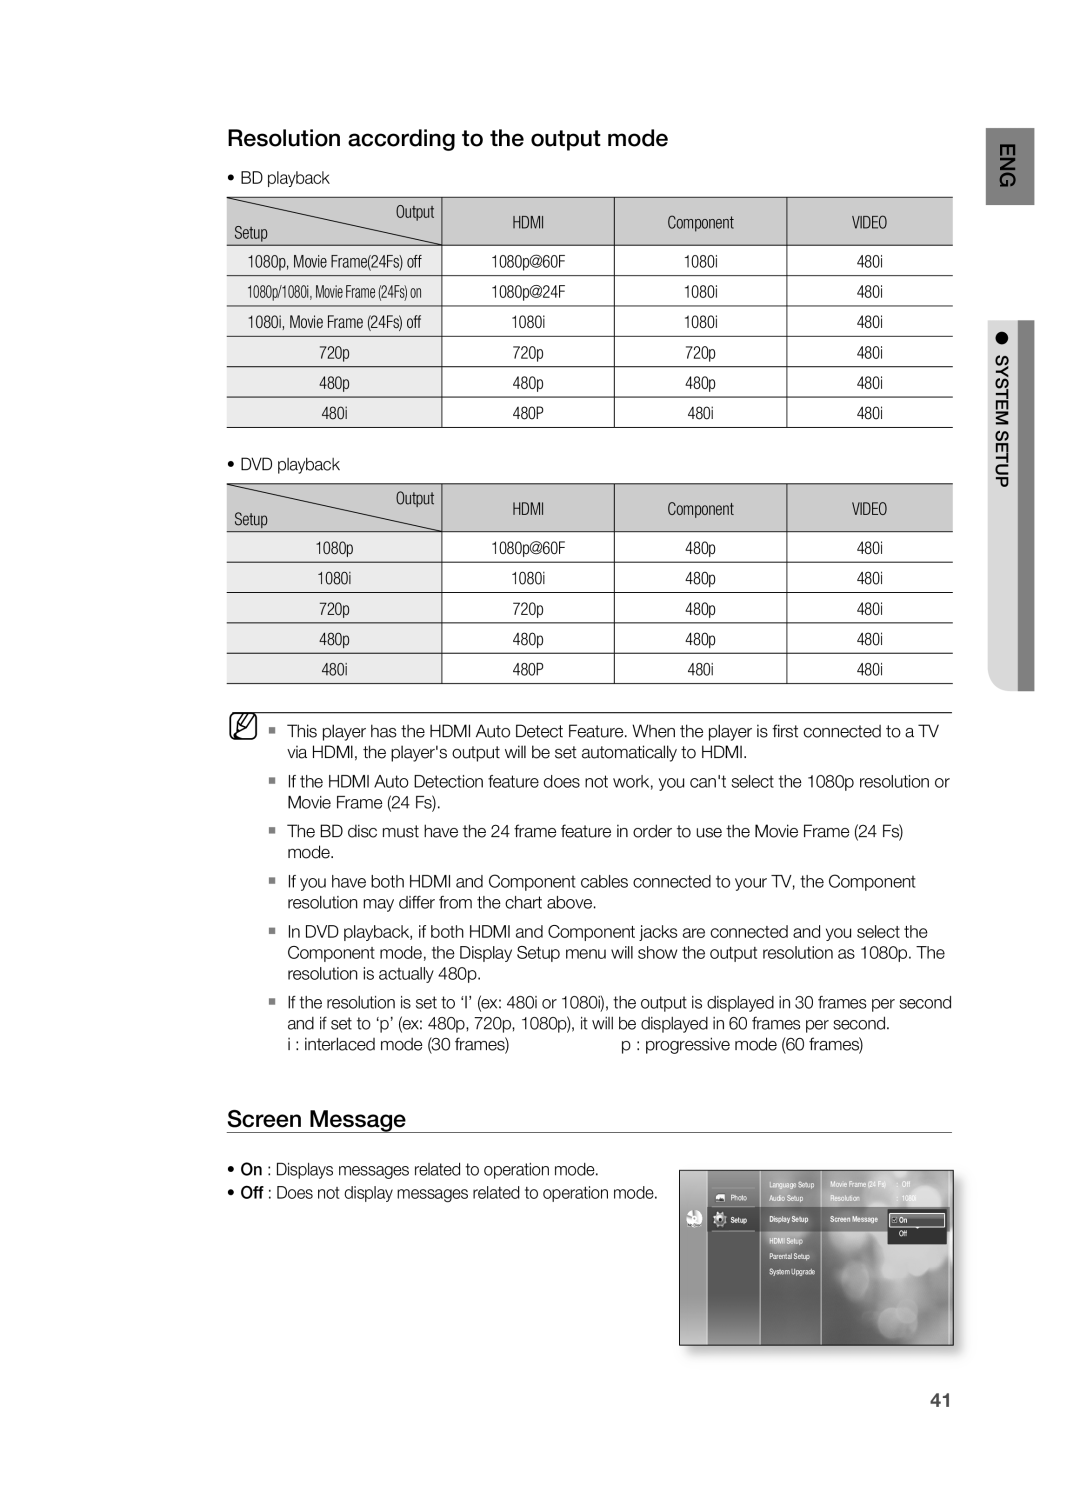 Samsung HT-BD2 manual Resolution according to the output mode, Screen Message 